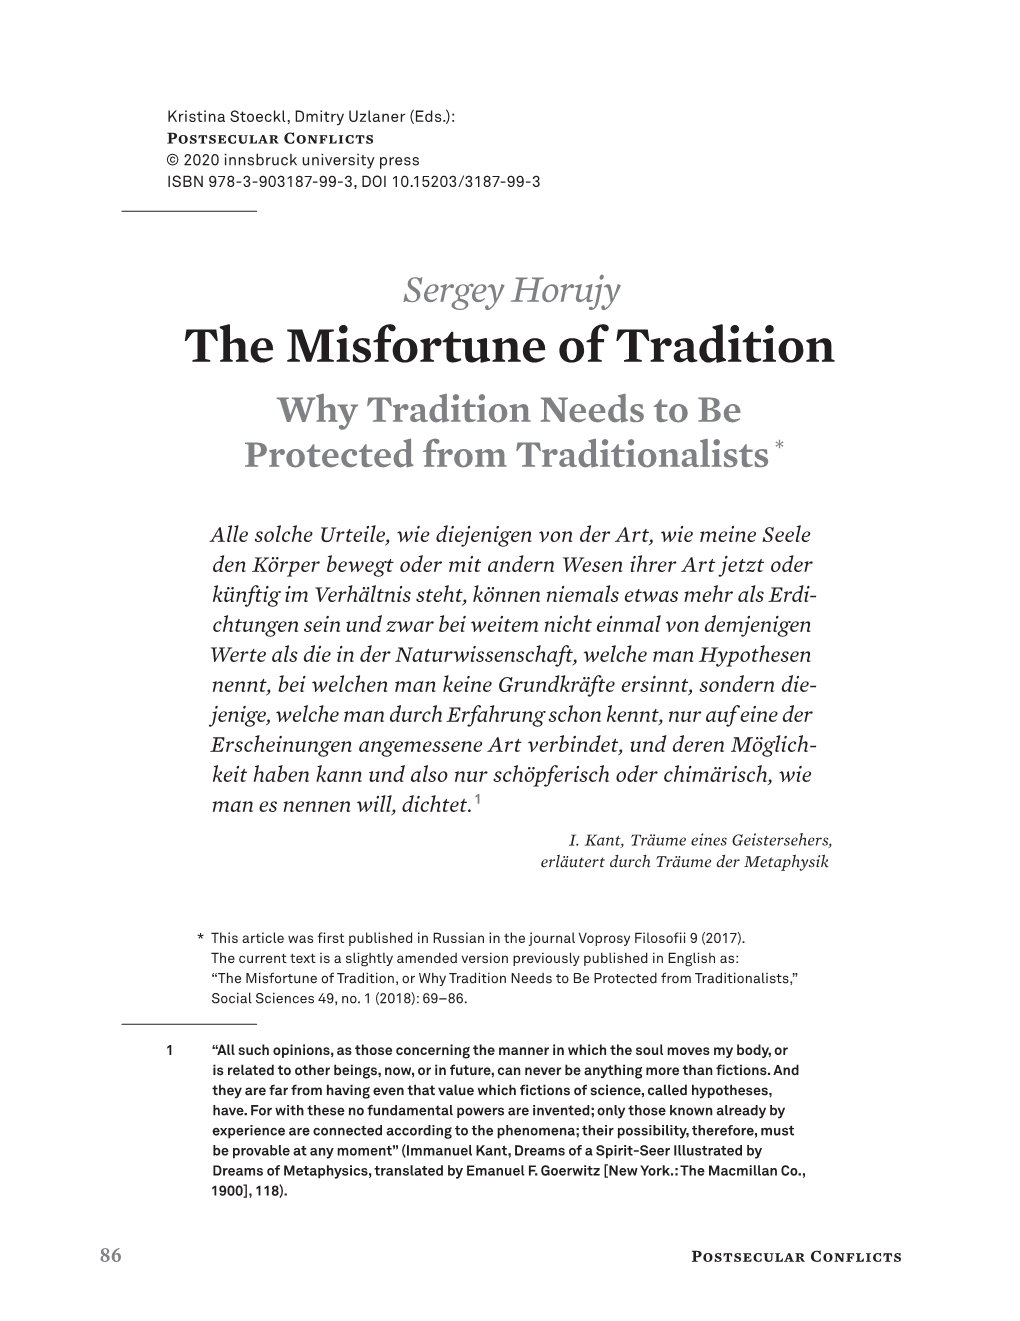 The Misfortune of Tradition Why Tradition Needs to Be Protected from Traditionalists *